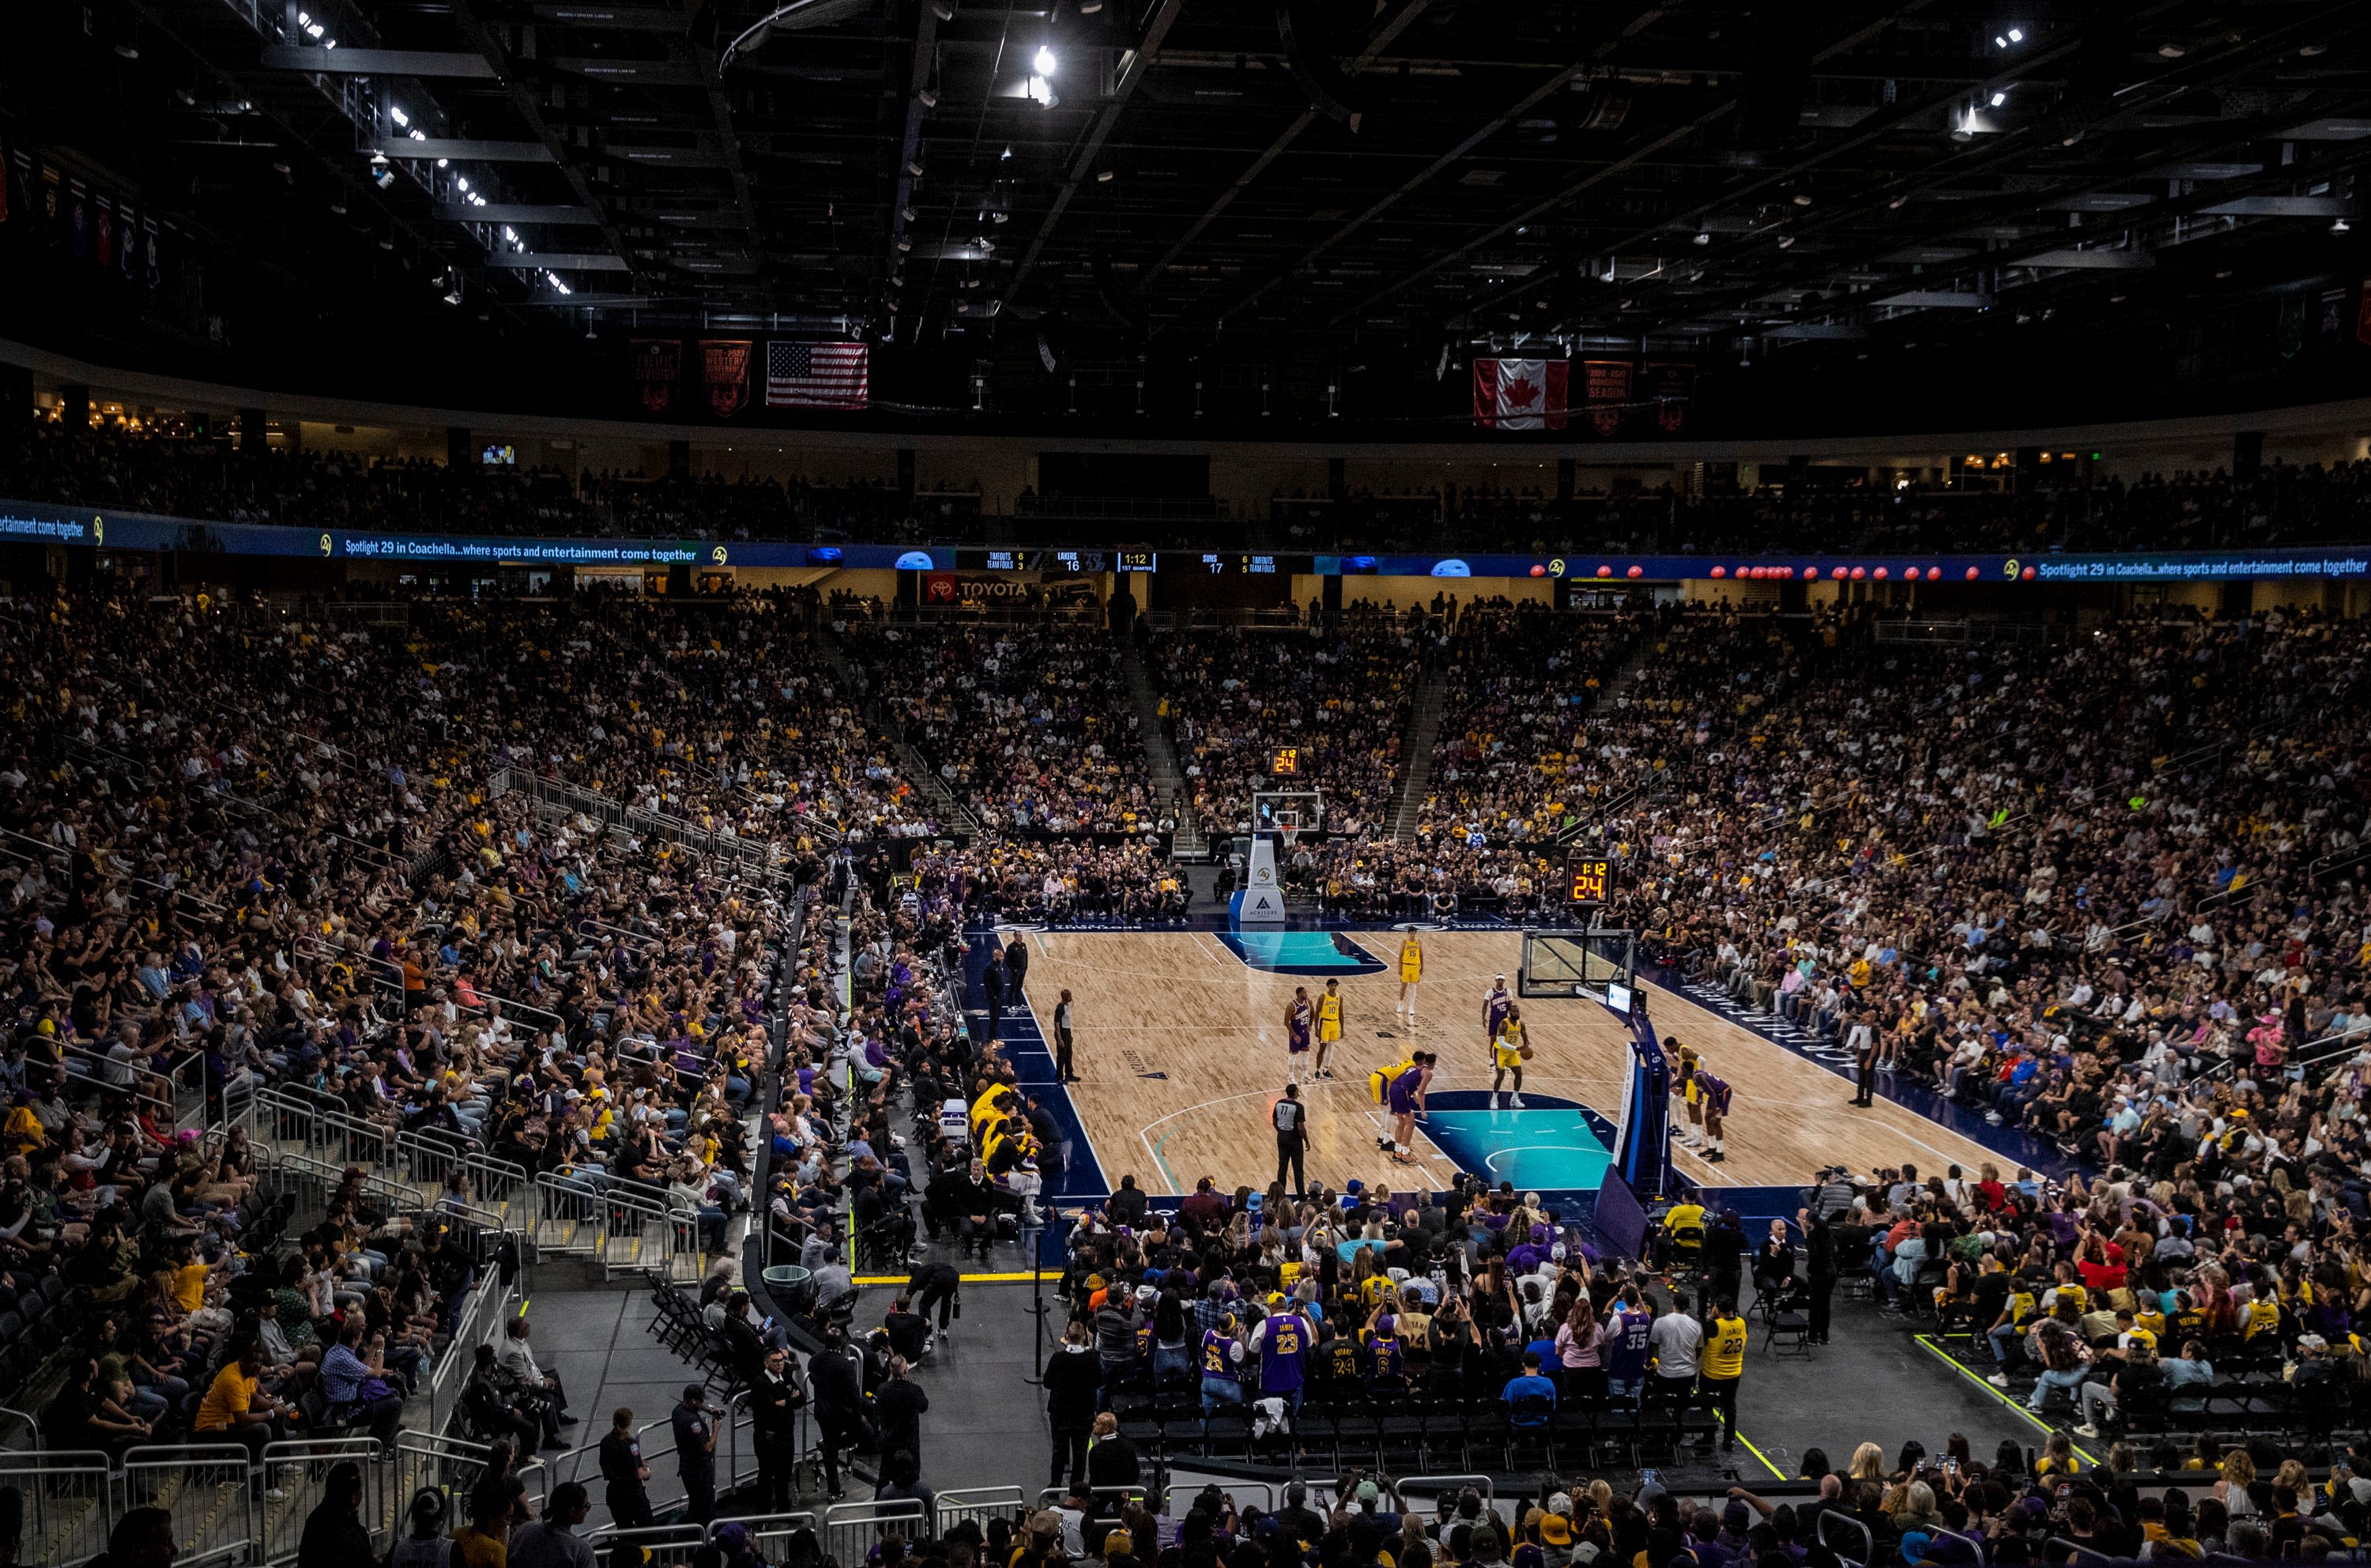 Los Angeles Lakers to return to Acrisure Arena for two NBA preseason games in October